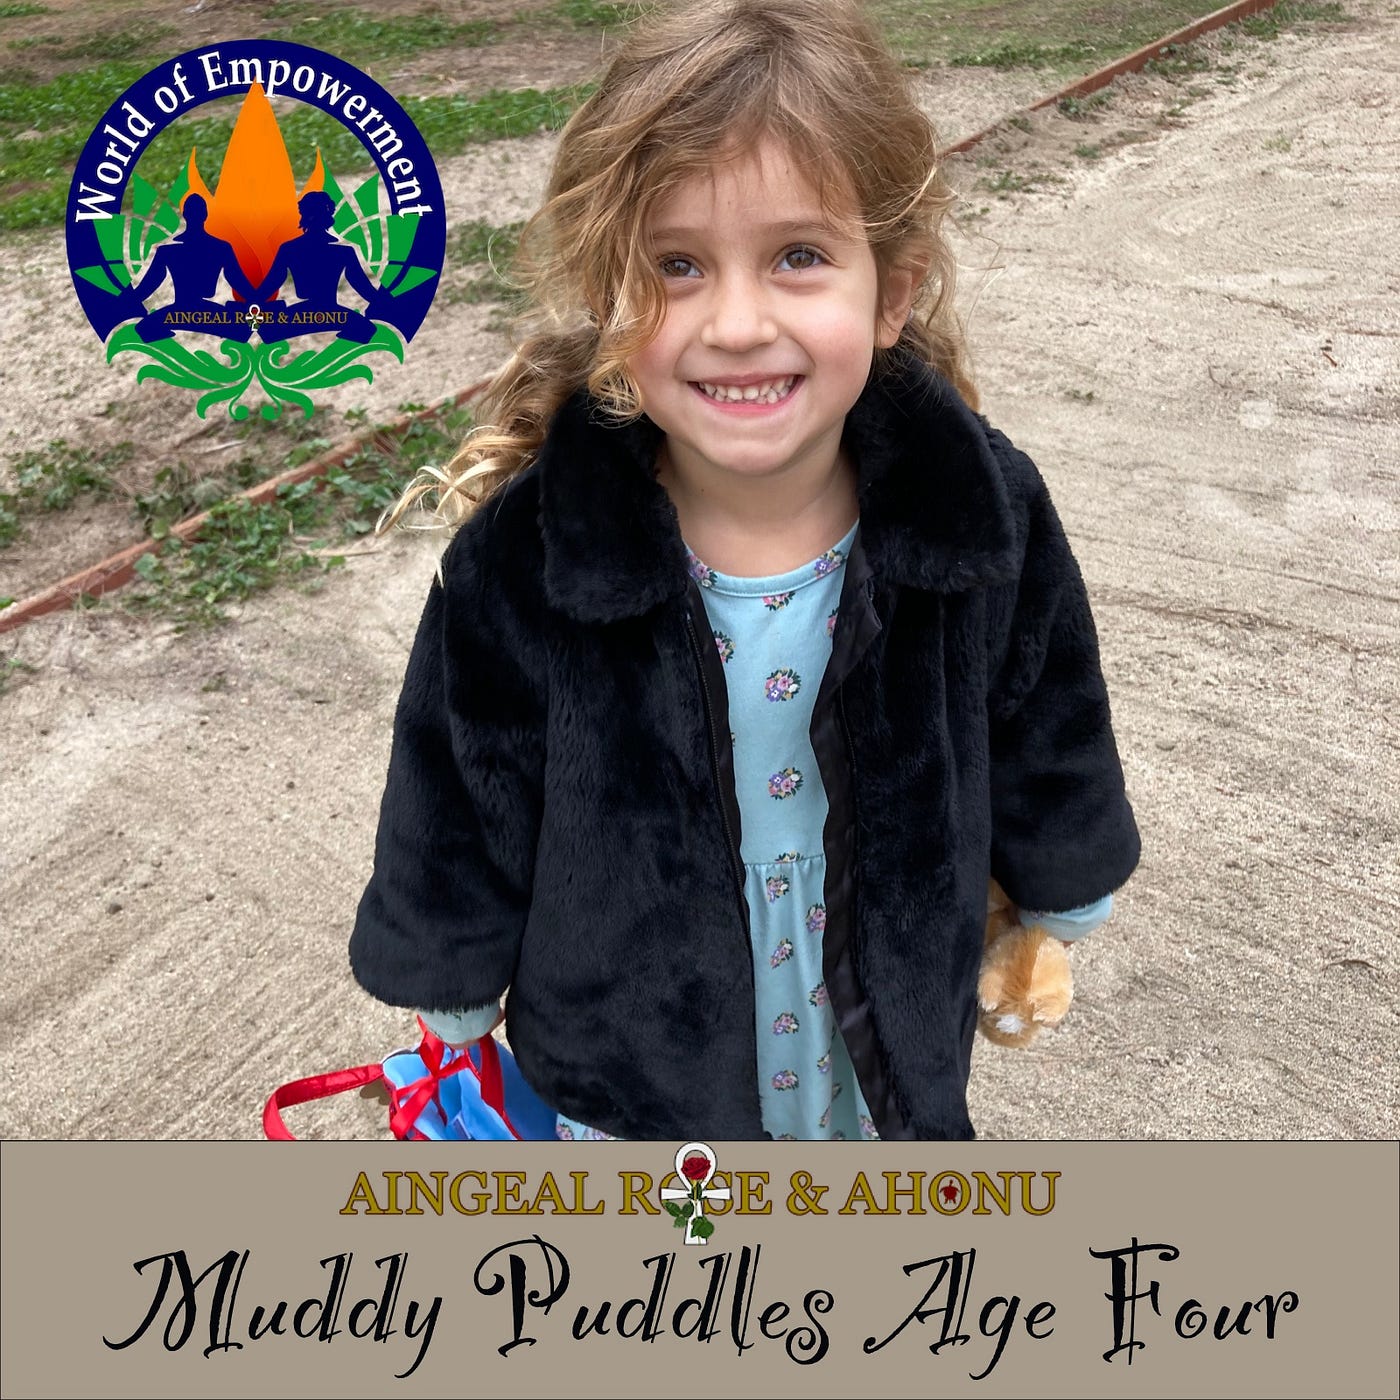 Children and Muddy Puddles Aingeal Rose & Ahonu World of Empowerment